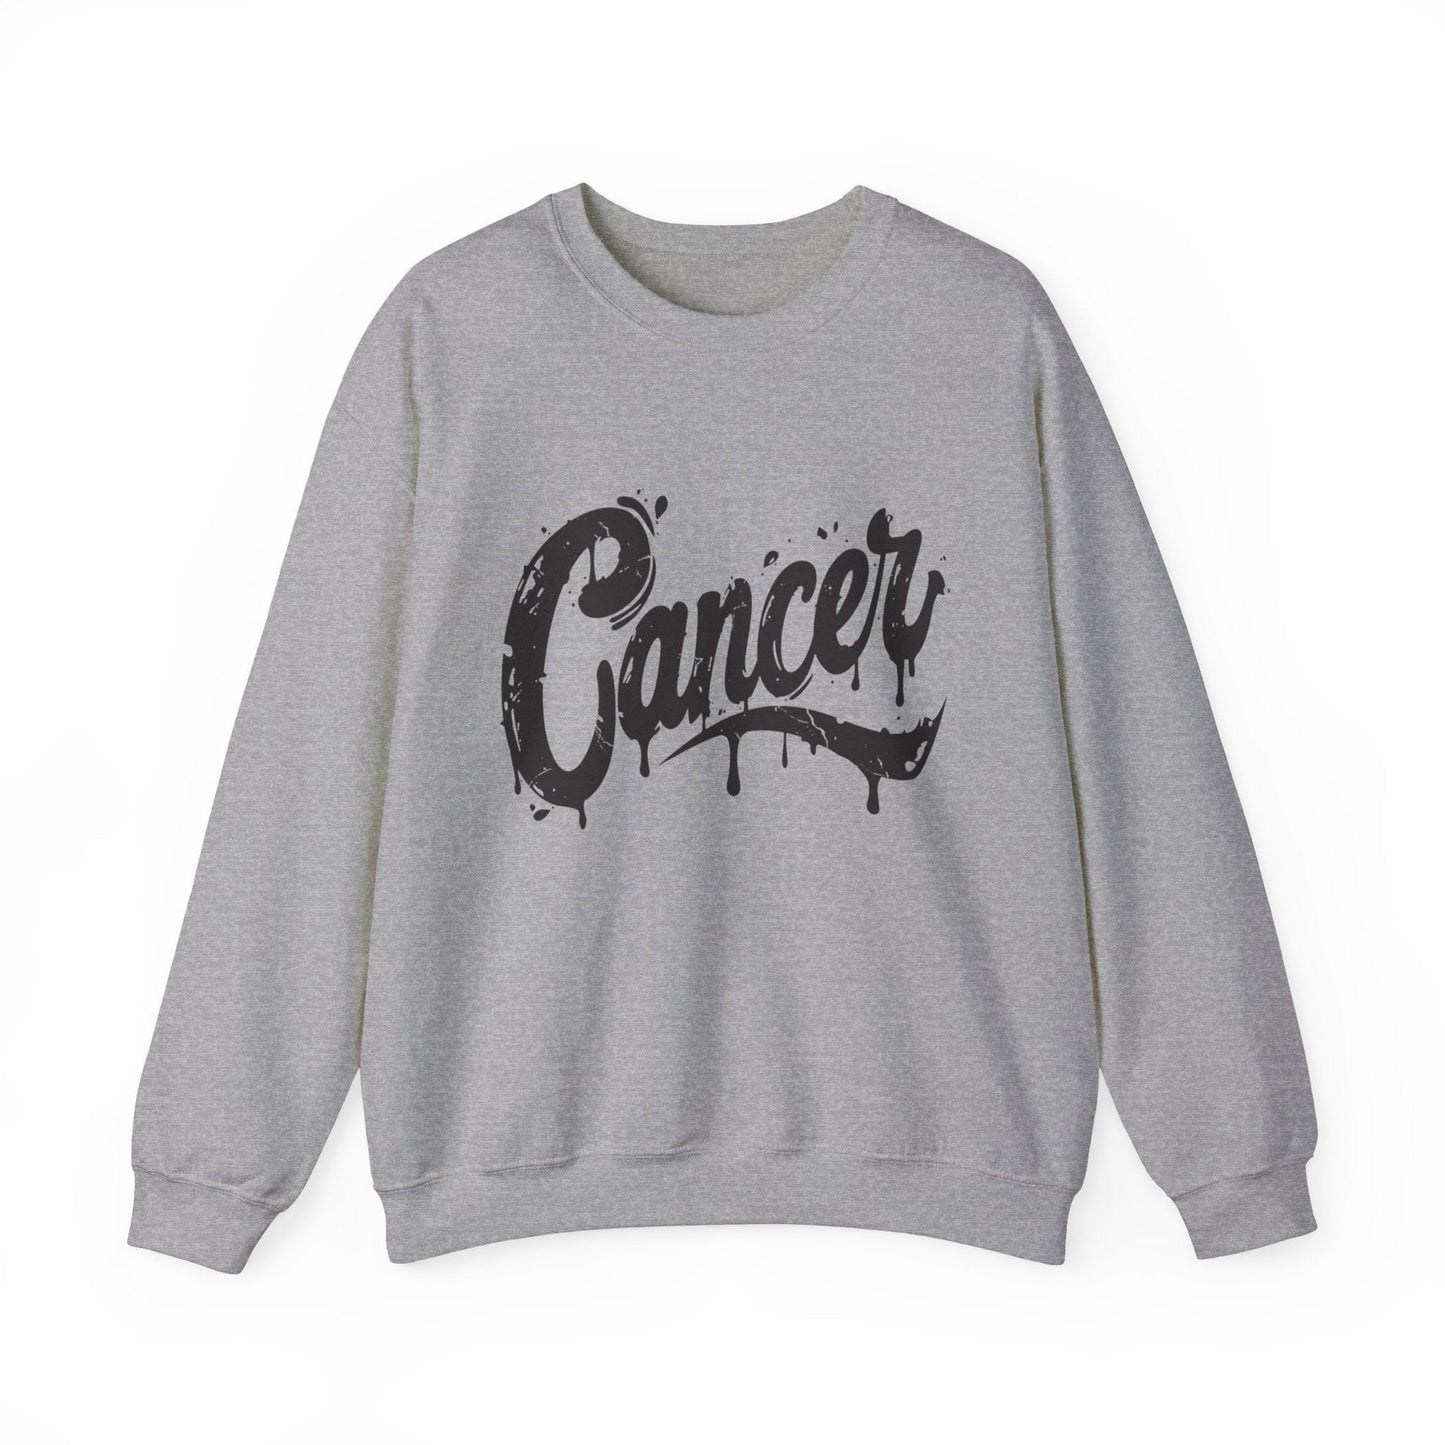 Sweatshirt S / Sport Grey Tidal Emotion Cancer Sweater: Comfort in the Currents